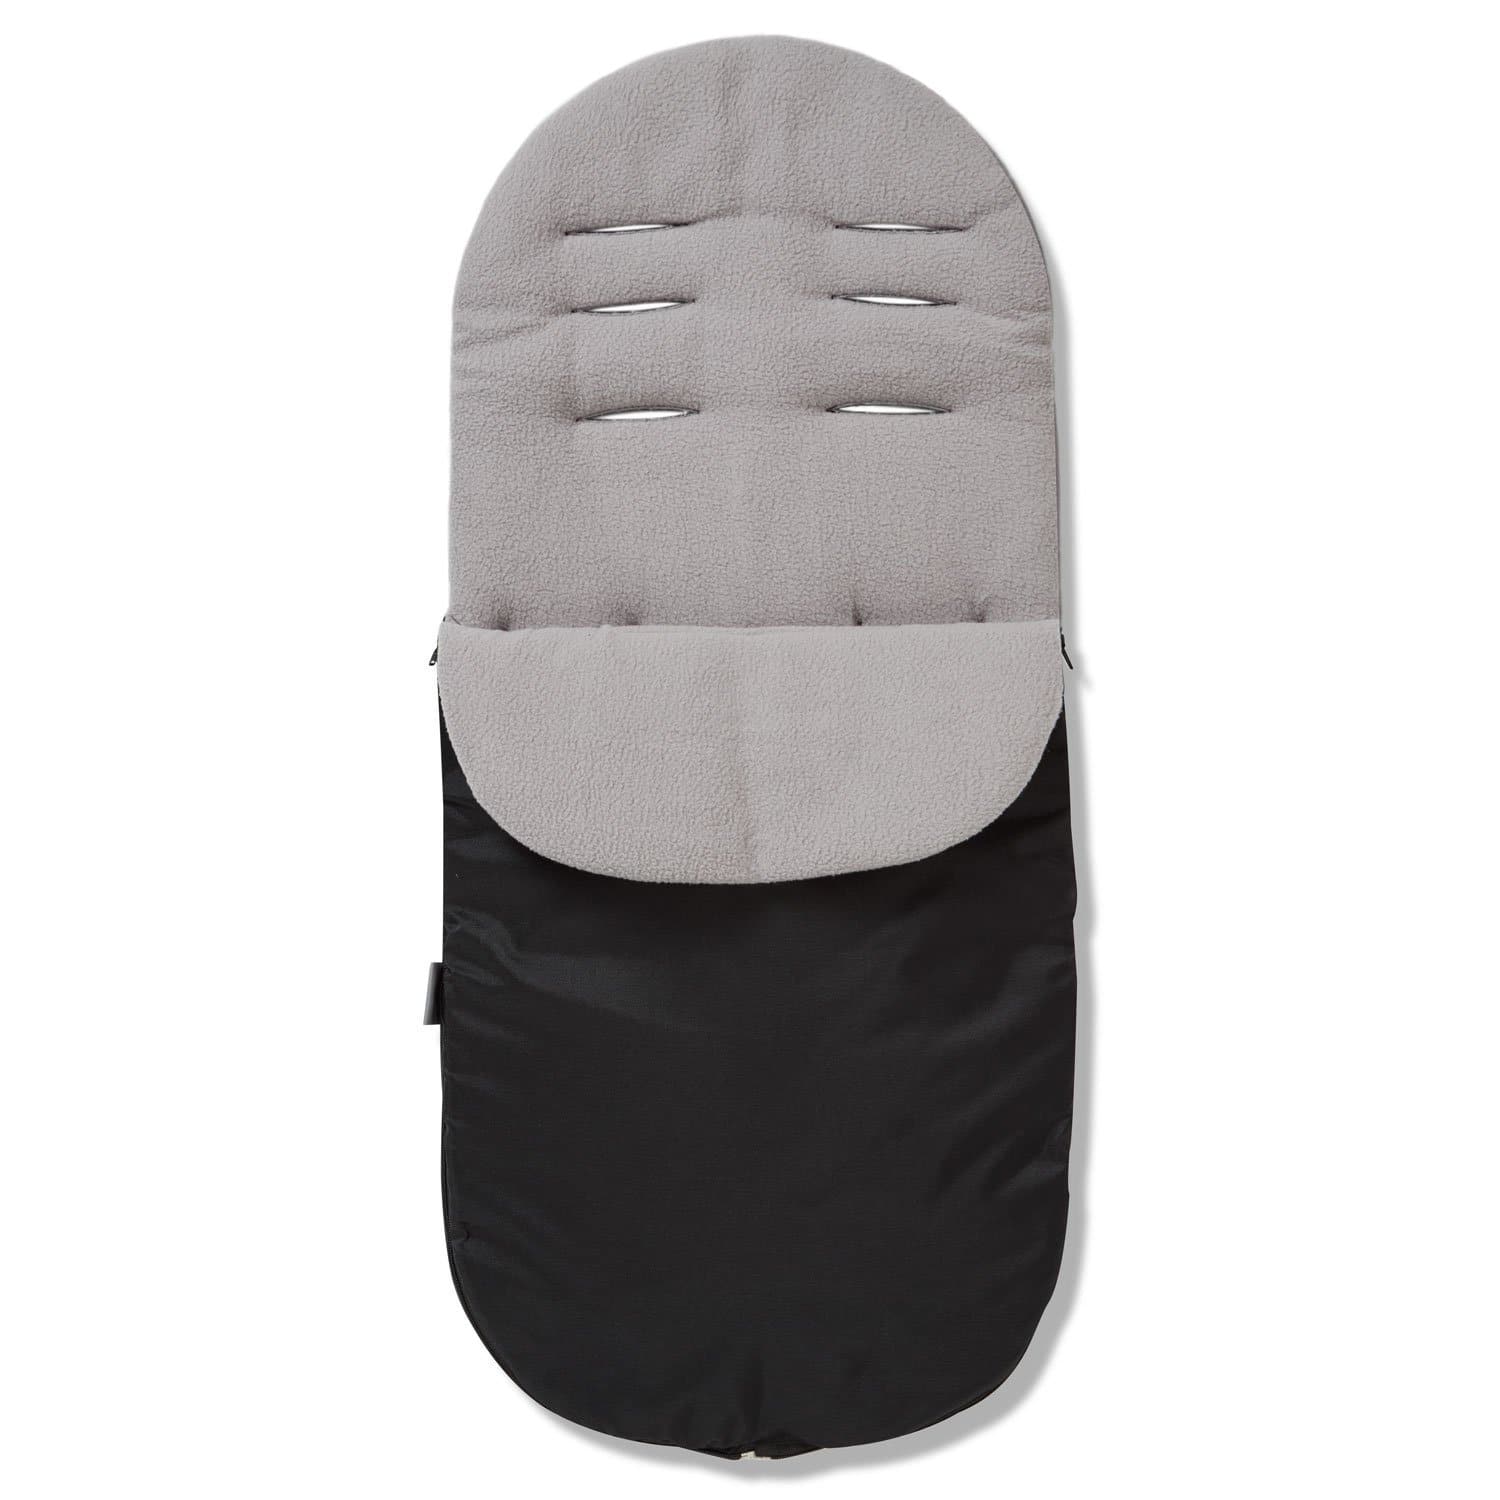 Footmuff / Cosy Toes Compatible with Easywalker - Grey / Fits All Models | For Your Little One